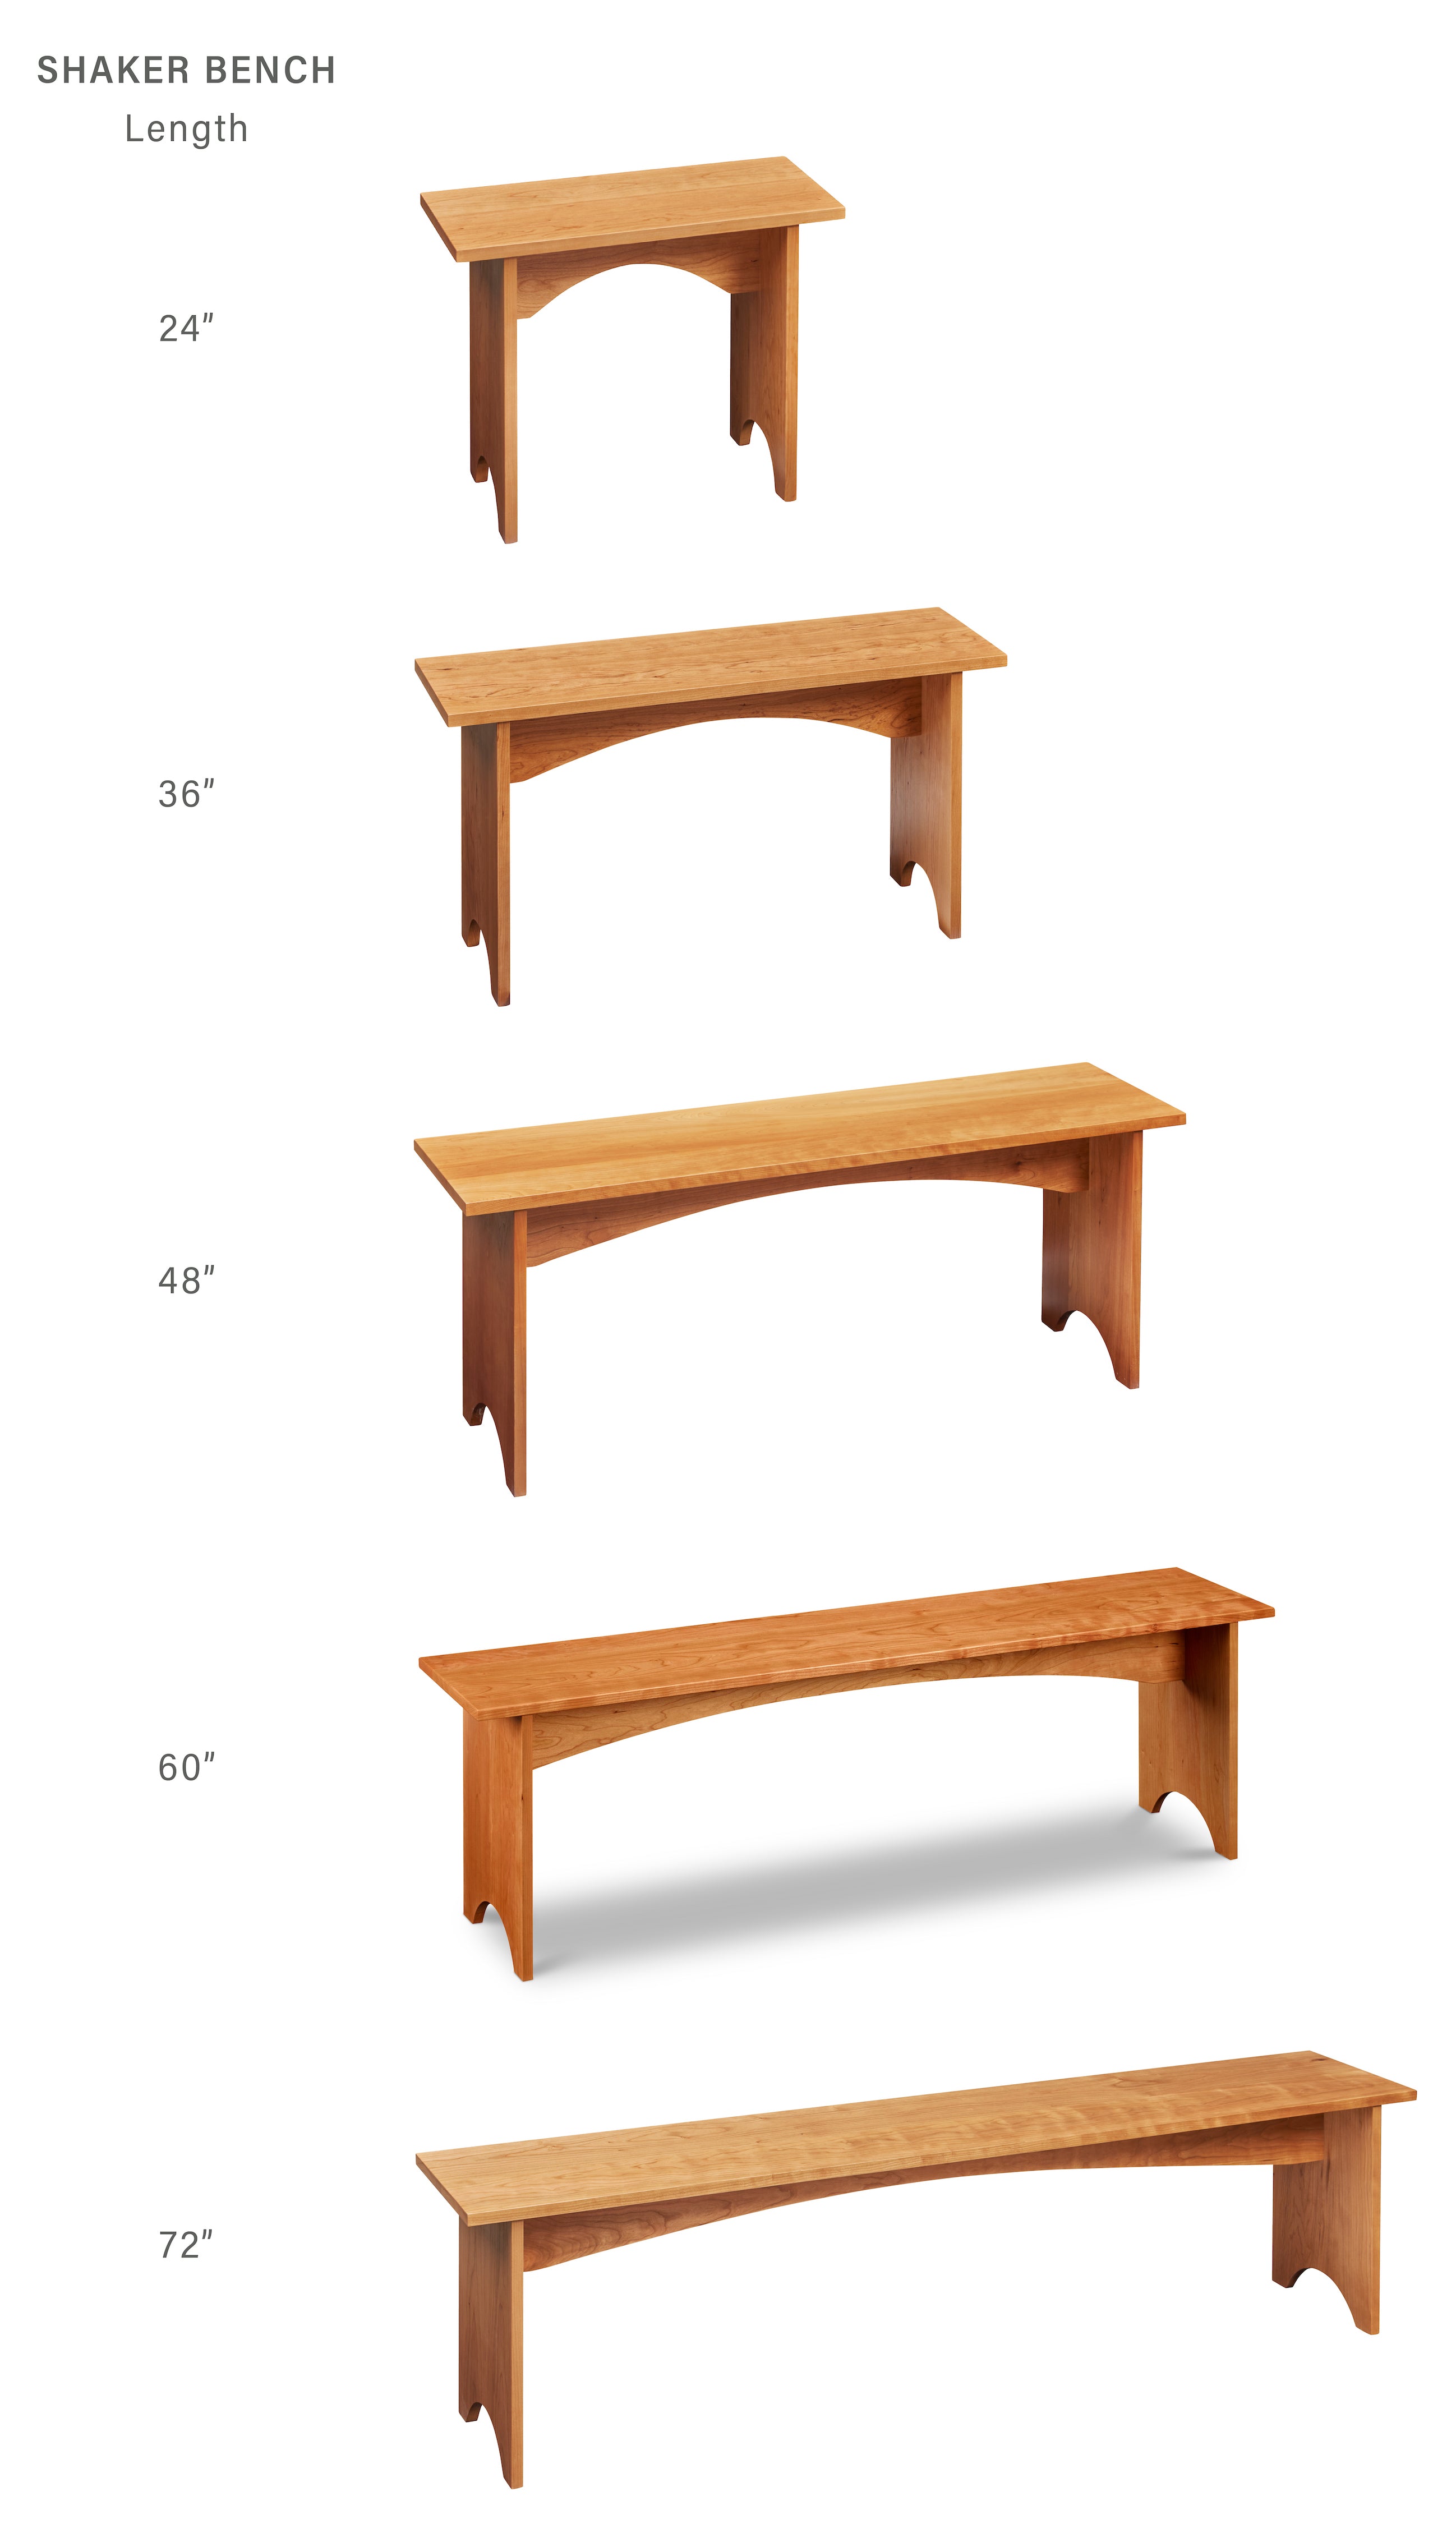 Visual of size change in one foot increments from 2 ft. to 6 ft. cherry shaker bench, with labels